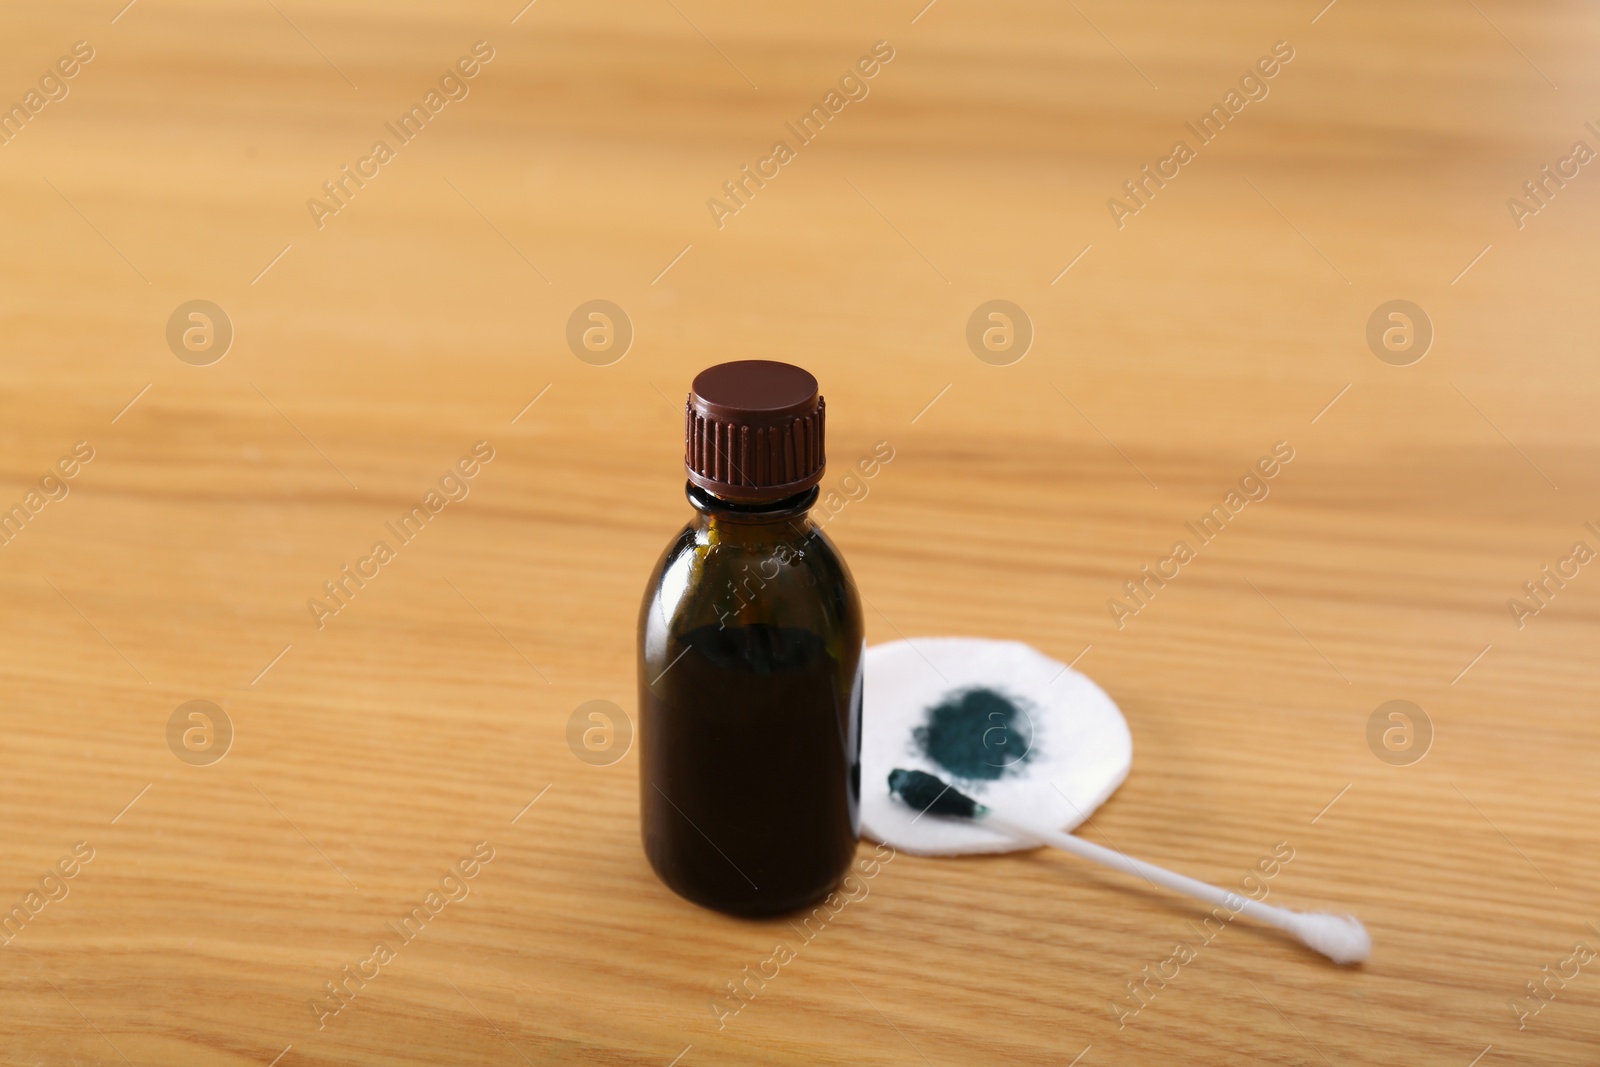 Photo of Bottle of brilliant green, cotton bud and pad on wooden table